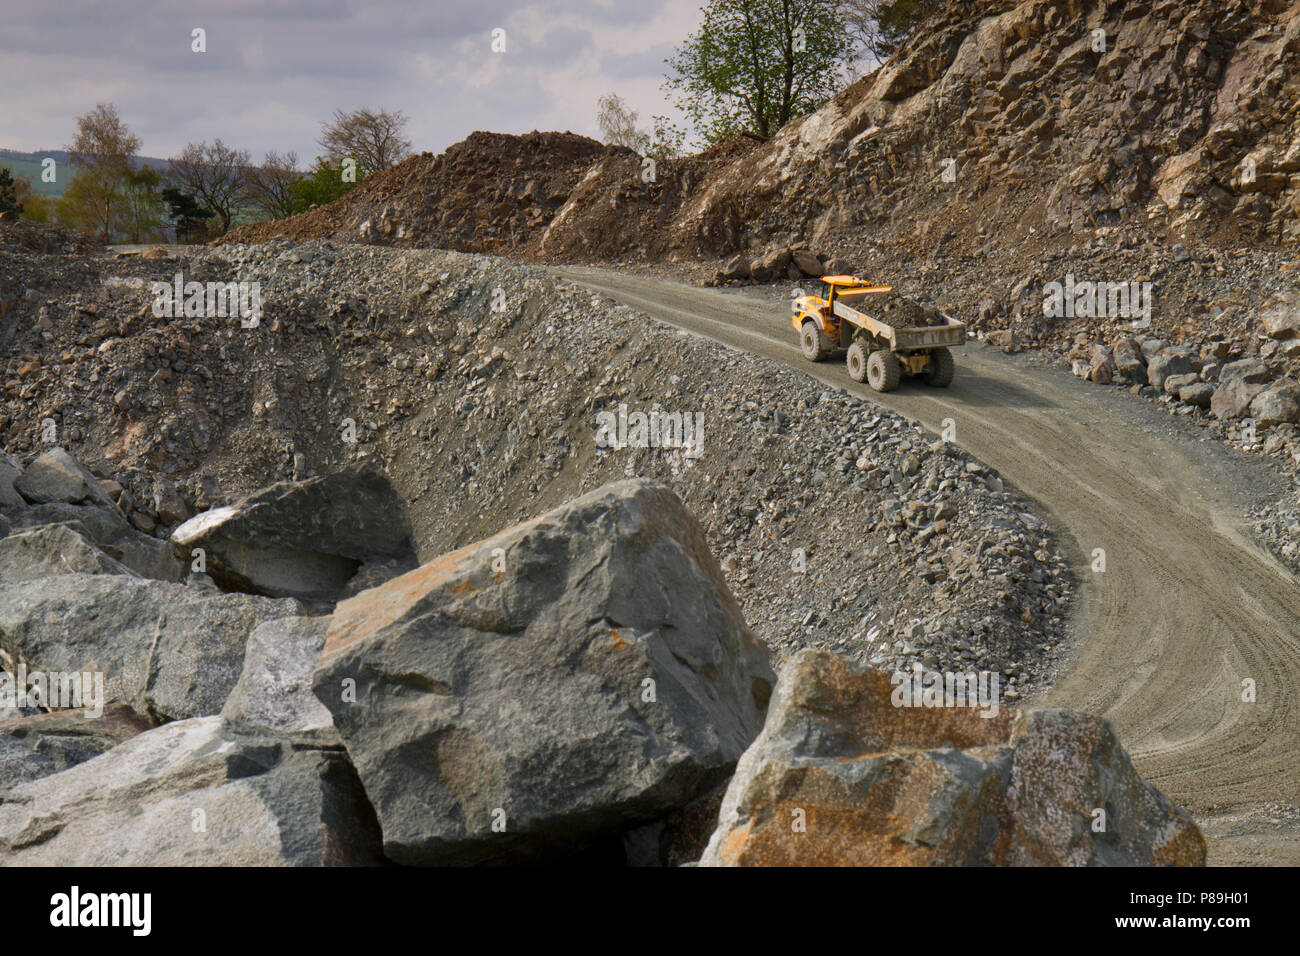 Quarrying; a Volvo A40G articulated dump truck hauling a load of stone out of the quarry. Criggion Quarry, Powys, Wales. April. Stock Photo